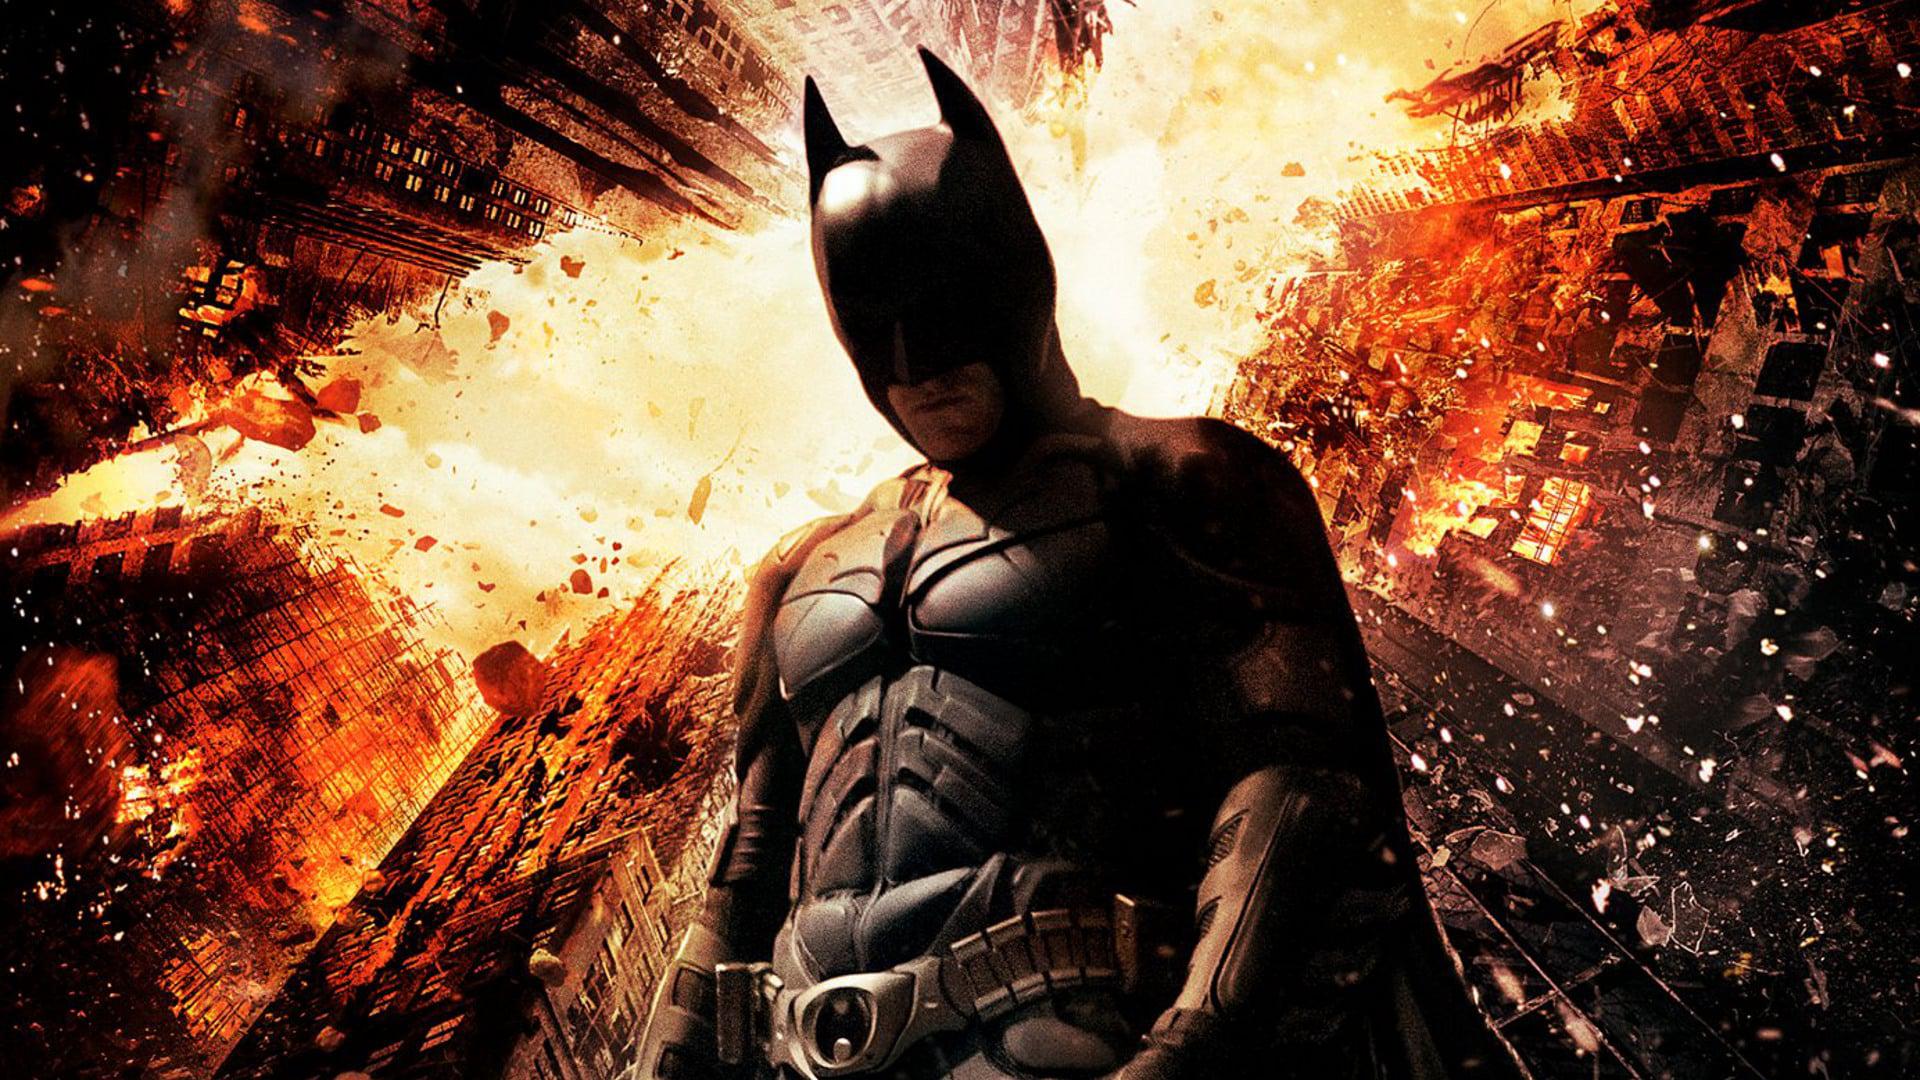 Backdrop Image for The Dark Knight Rises